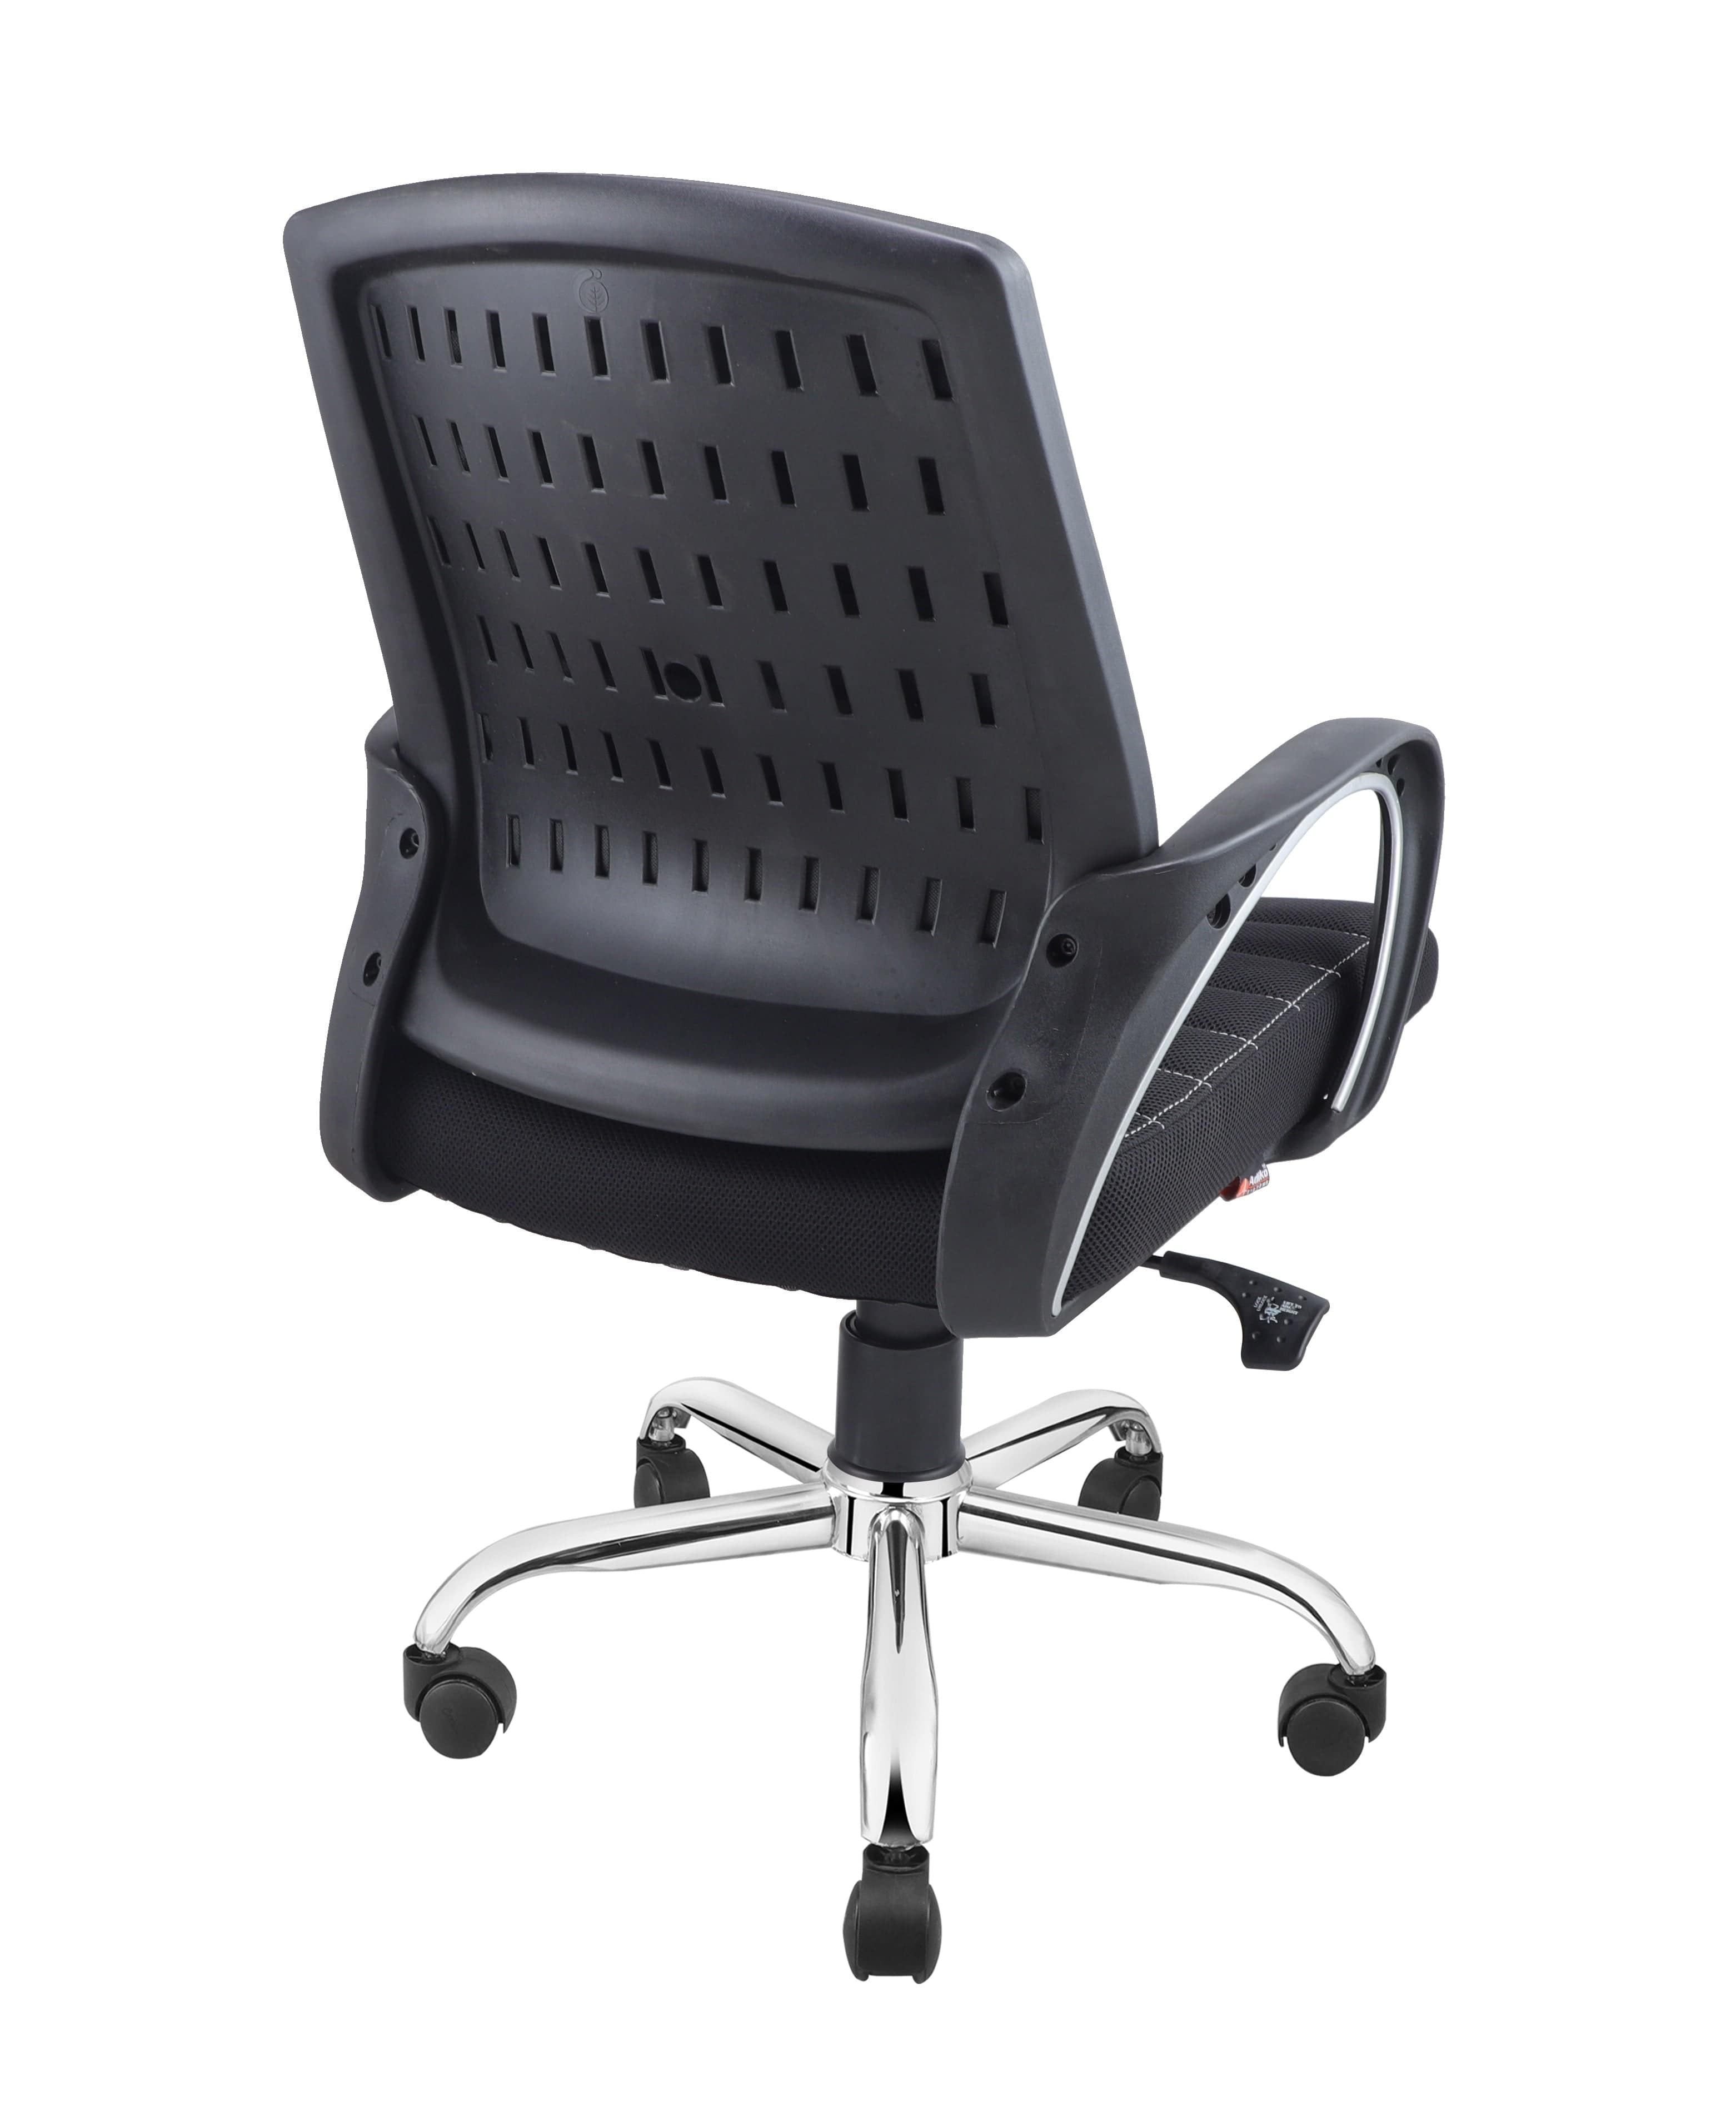 Smart Ergonomic Chair With Breathable Black Mesh Fabric